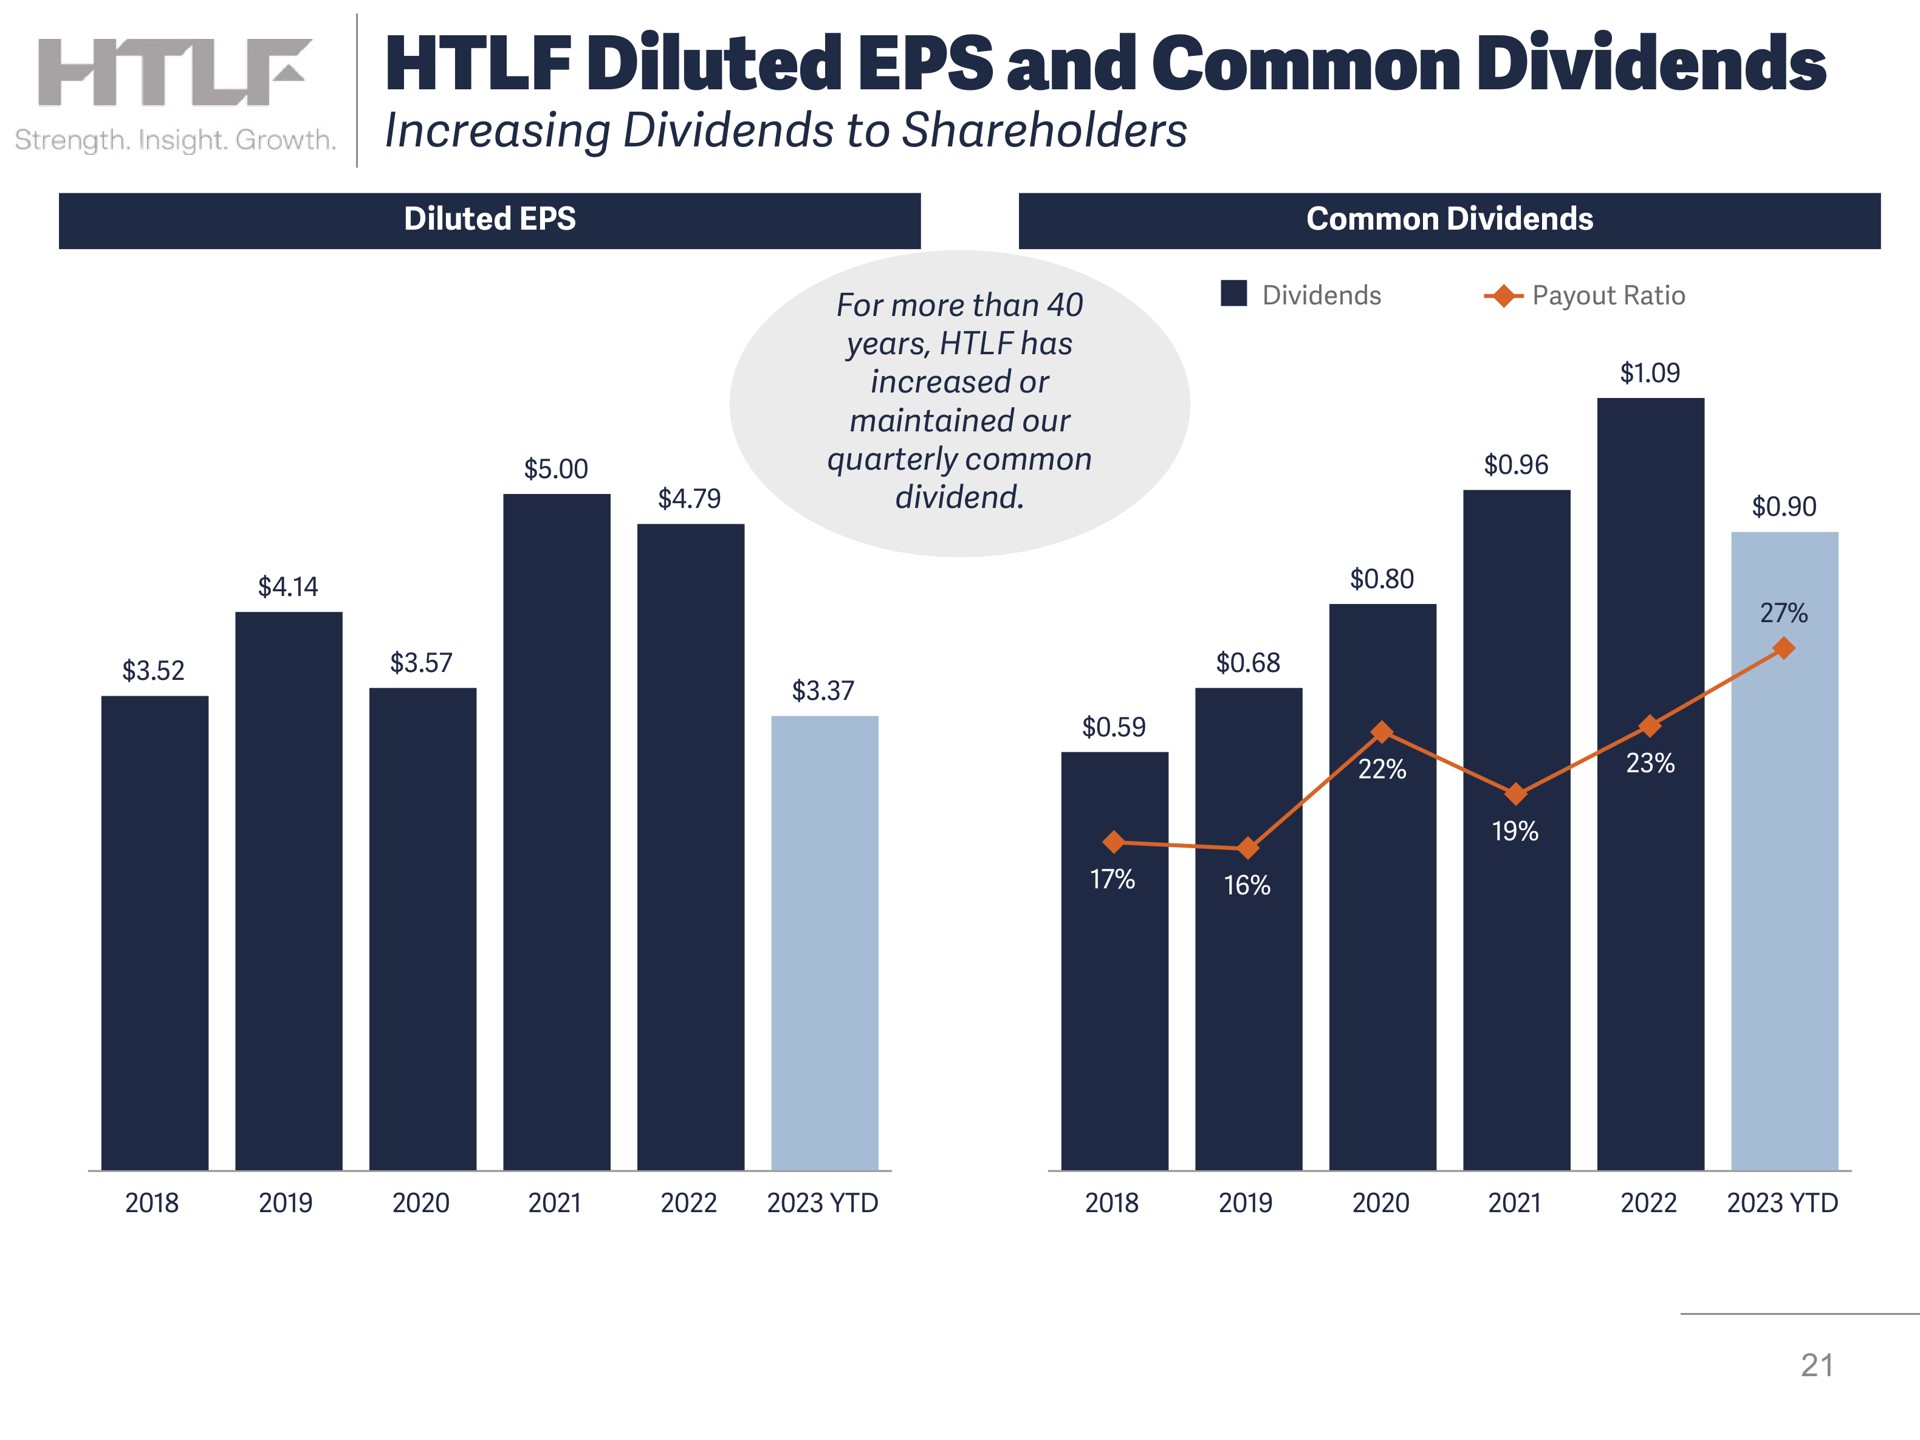 diluted and common dividends increasing dividends to shareholders | Heartland Financial USA